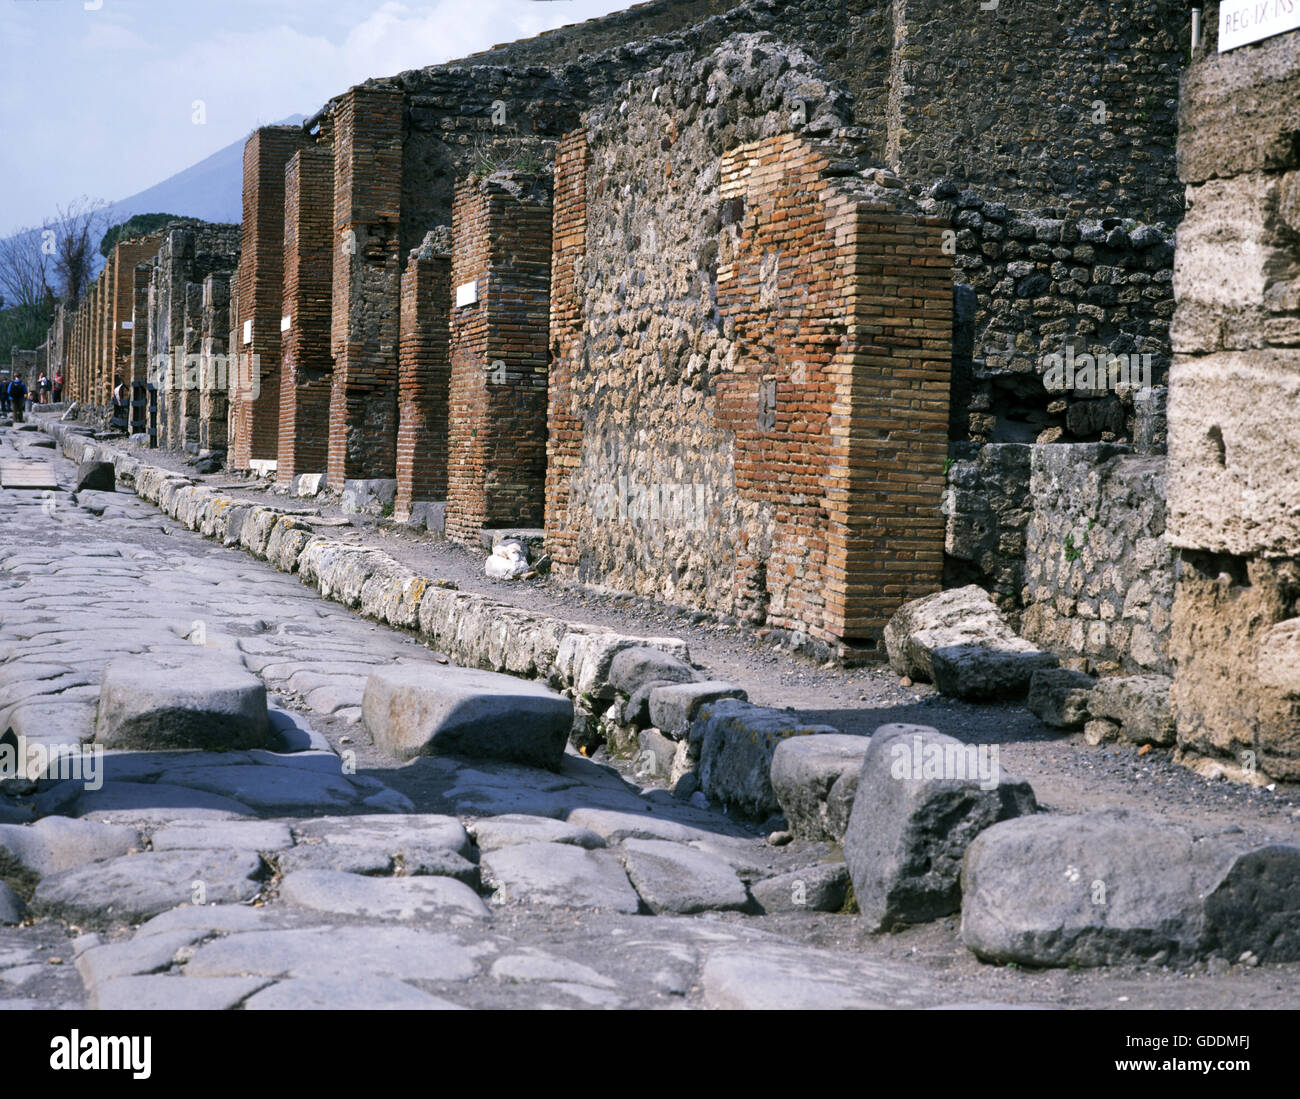 Pompeii in Italy, City destroyed and completely buried during an Eruption of the Volcano Mount Vesuvius in August 79, a Unesco World Heritage Site since 1997 Stock Photo